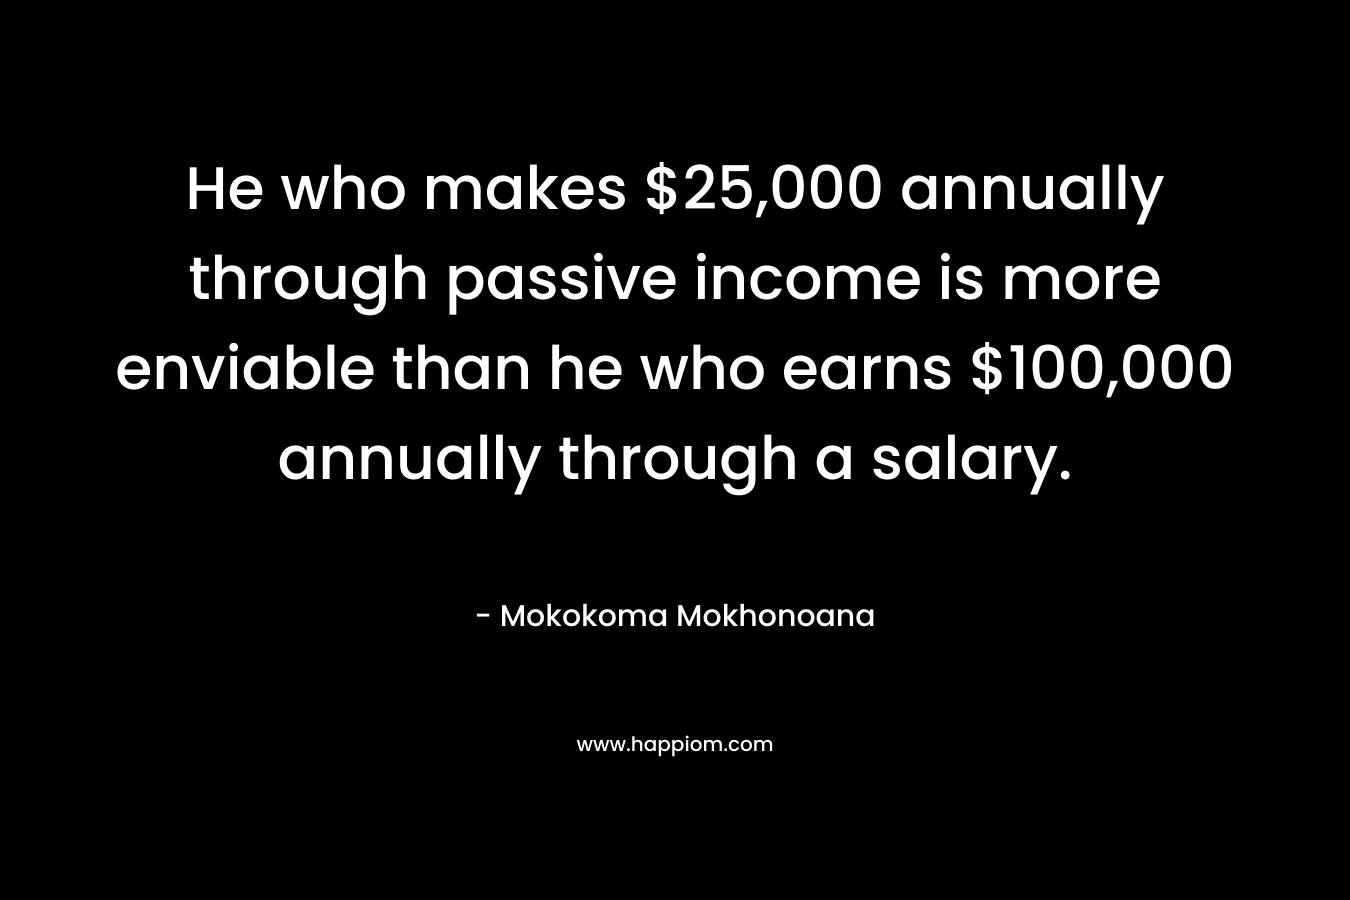 He who makes $25,000 annually through passive income is more enviable than he who earns $100,000 annually through a salary.